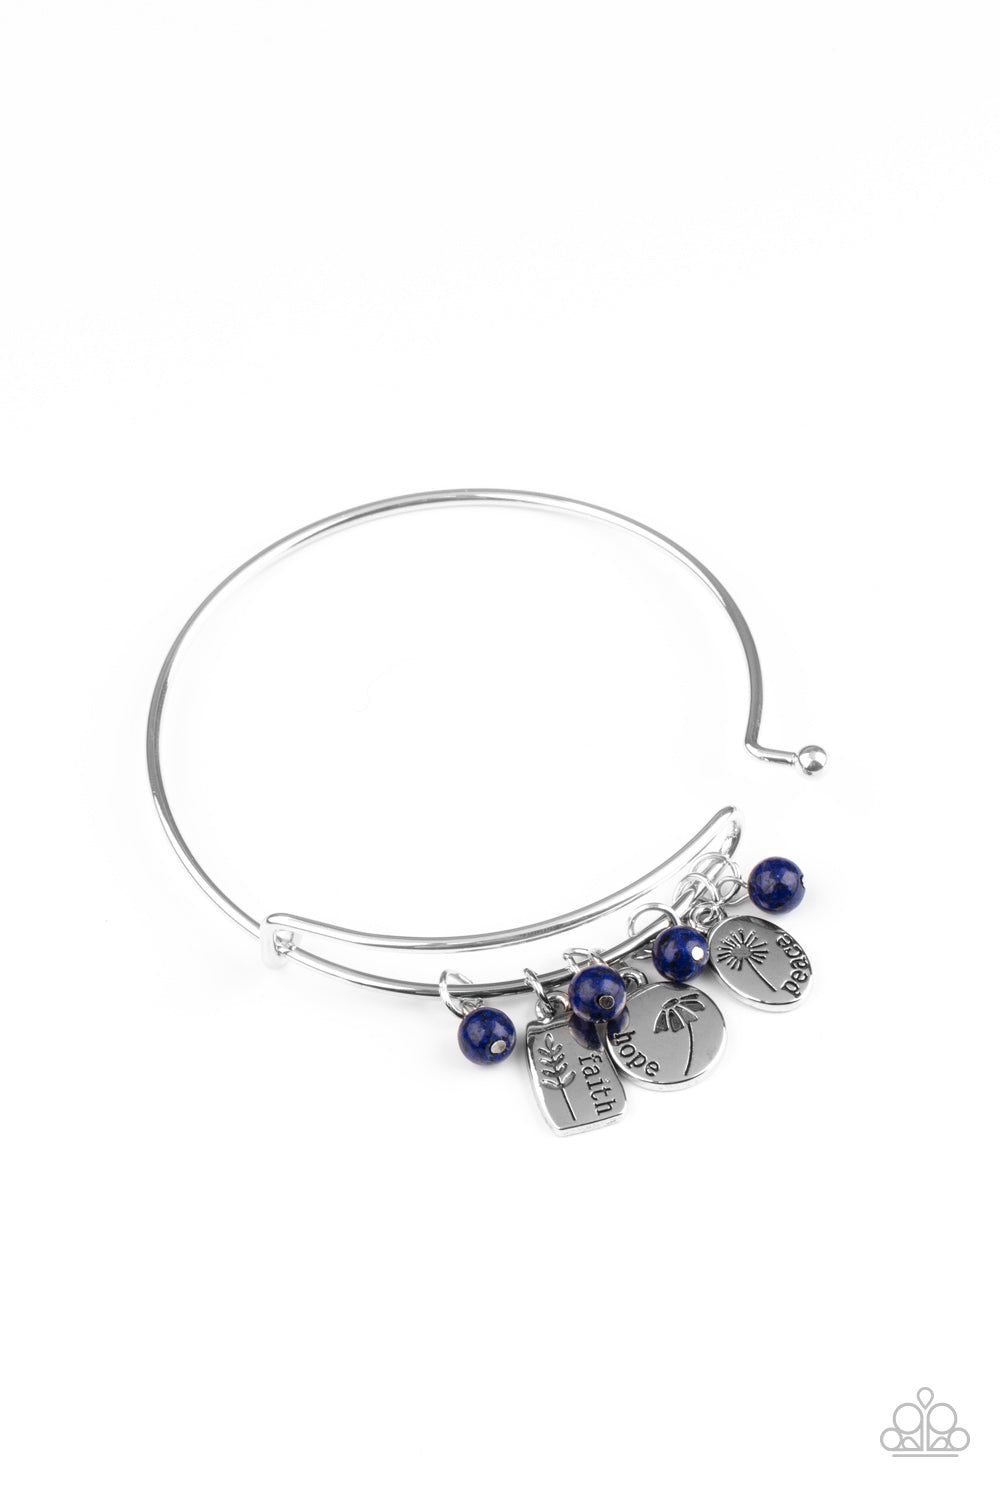 GROWING Strong - Paparazzi - Blue Bead Silver Inspirational Charms Toggle Bracelet